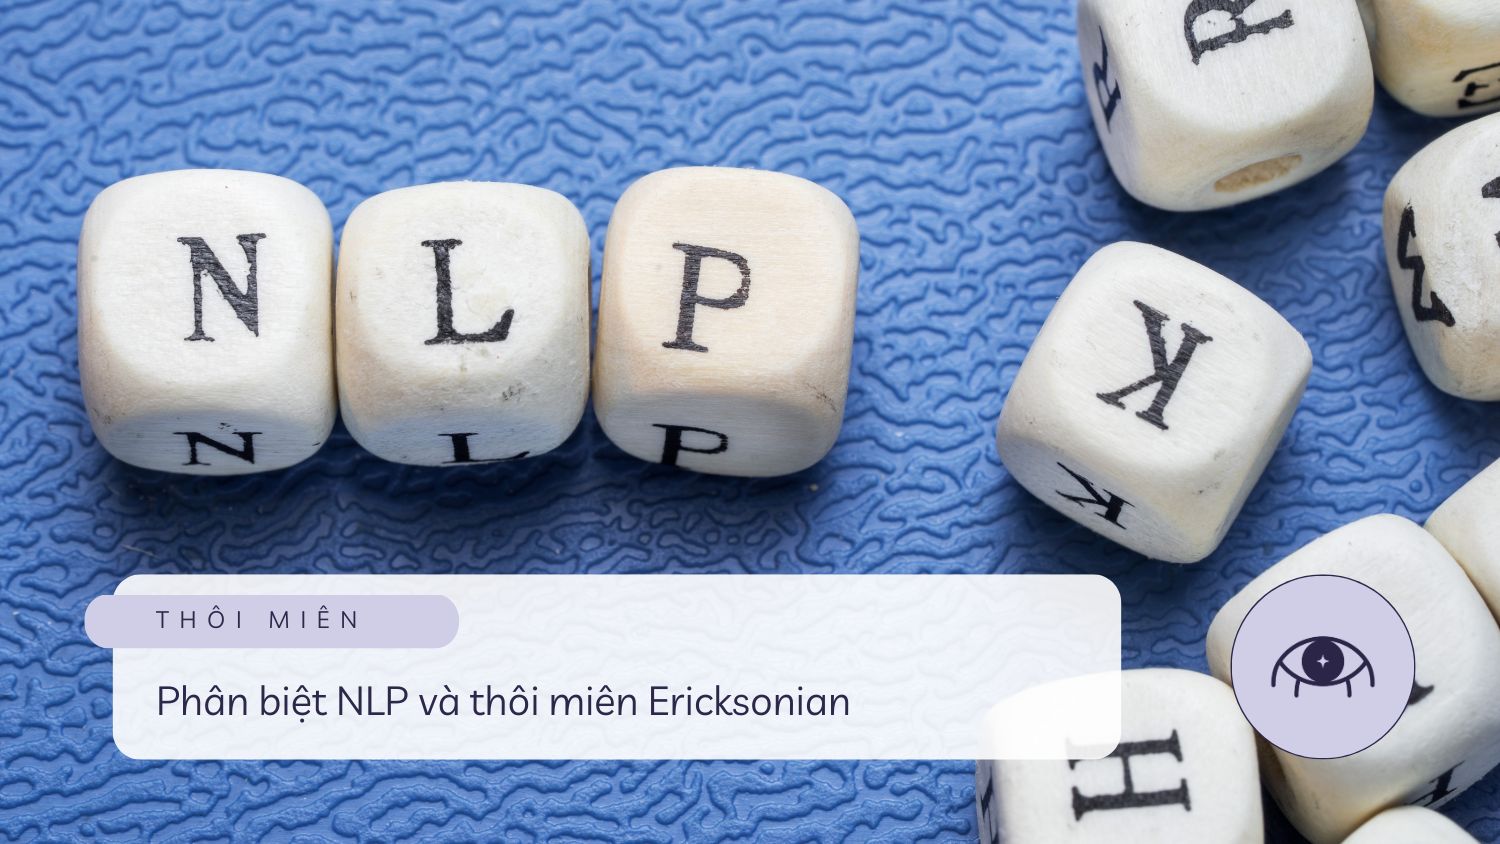 house-of-hypnosis-nlp-thoi-mien-ericksonian